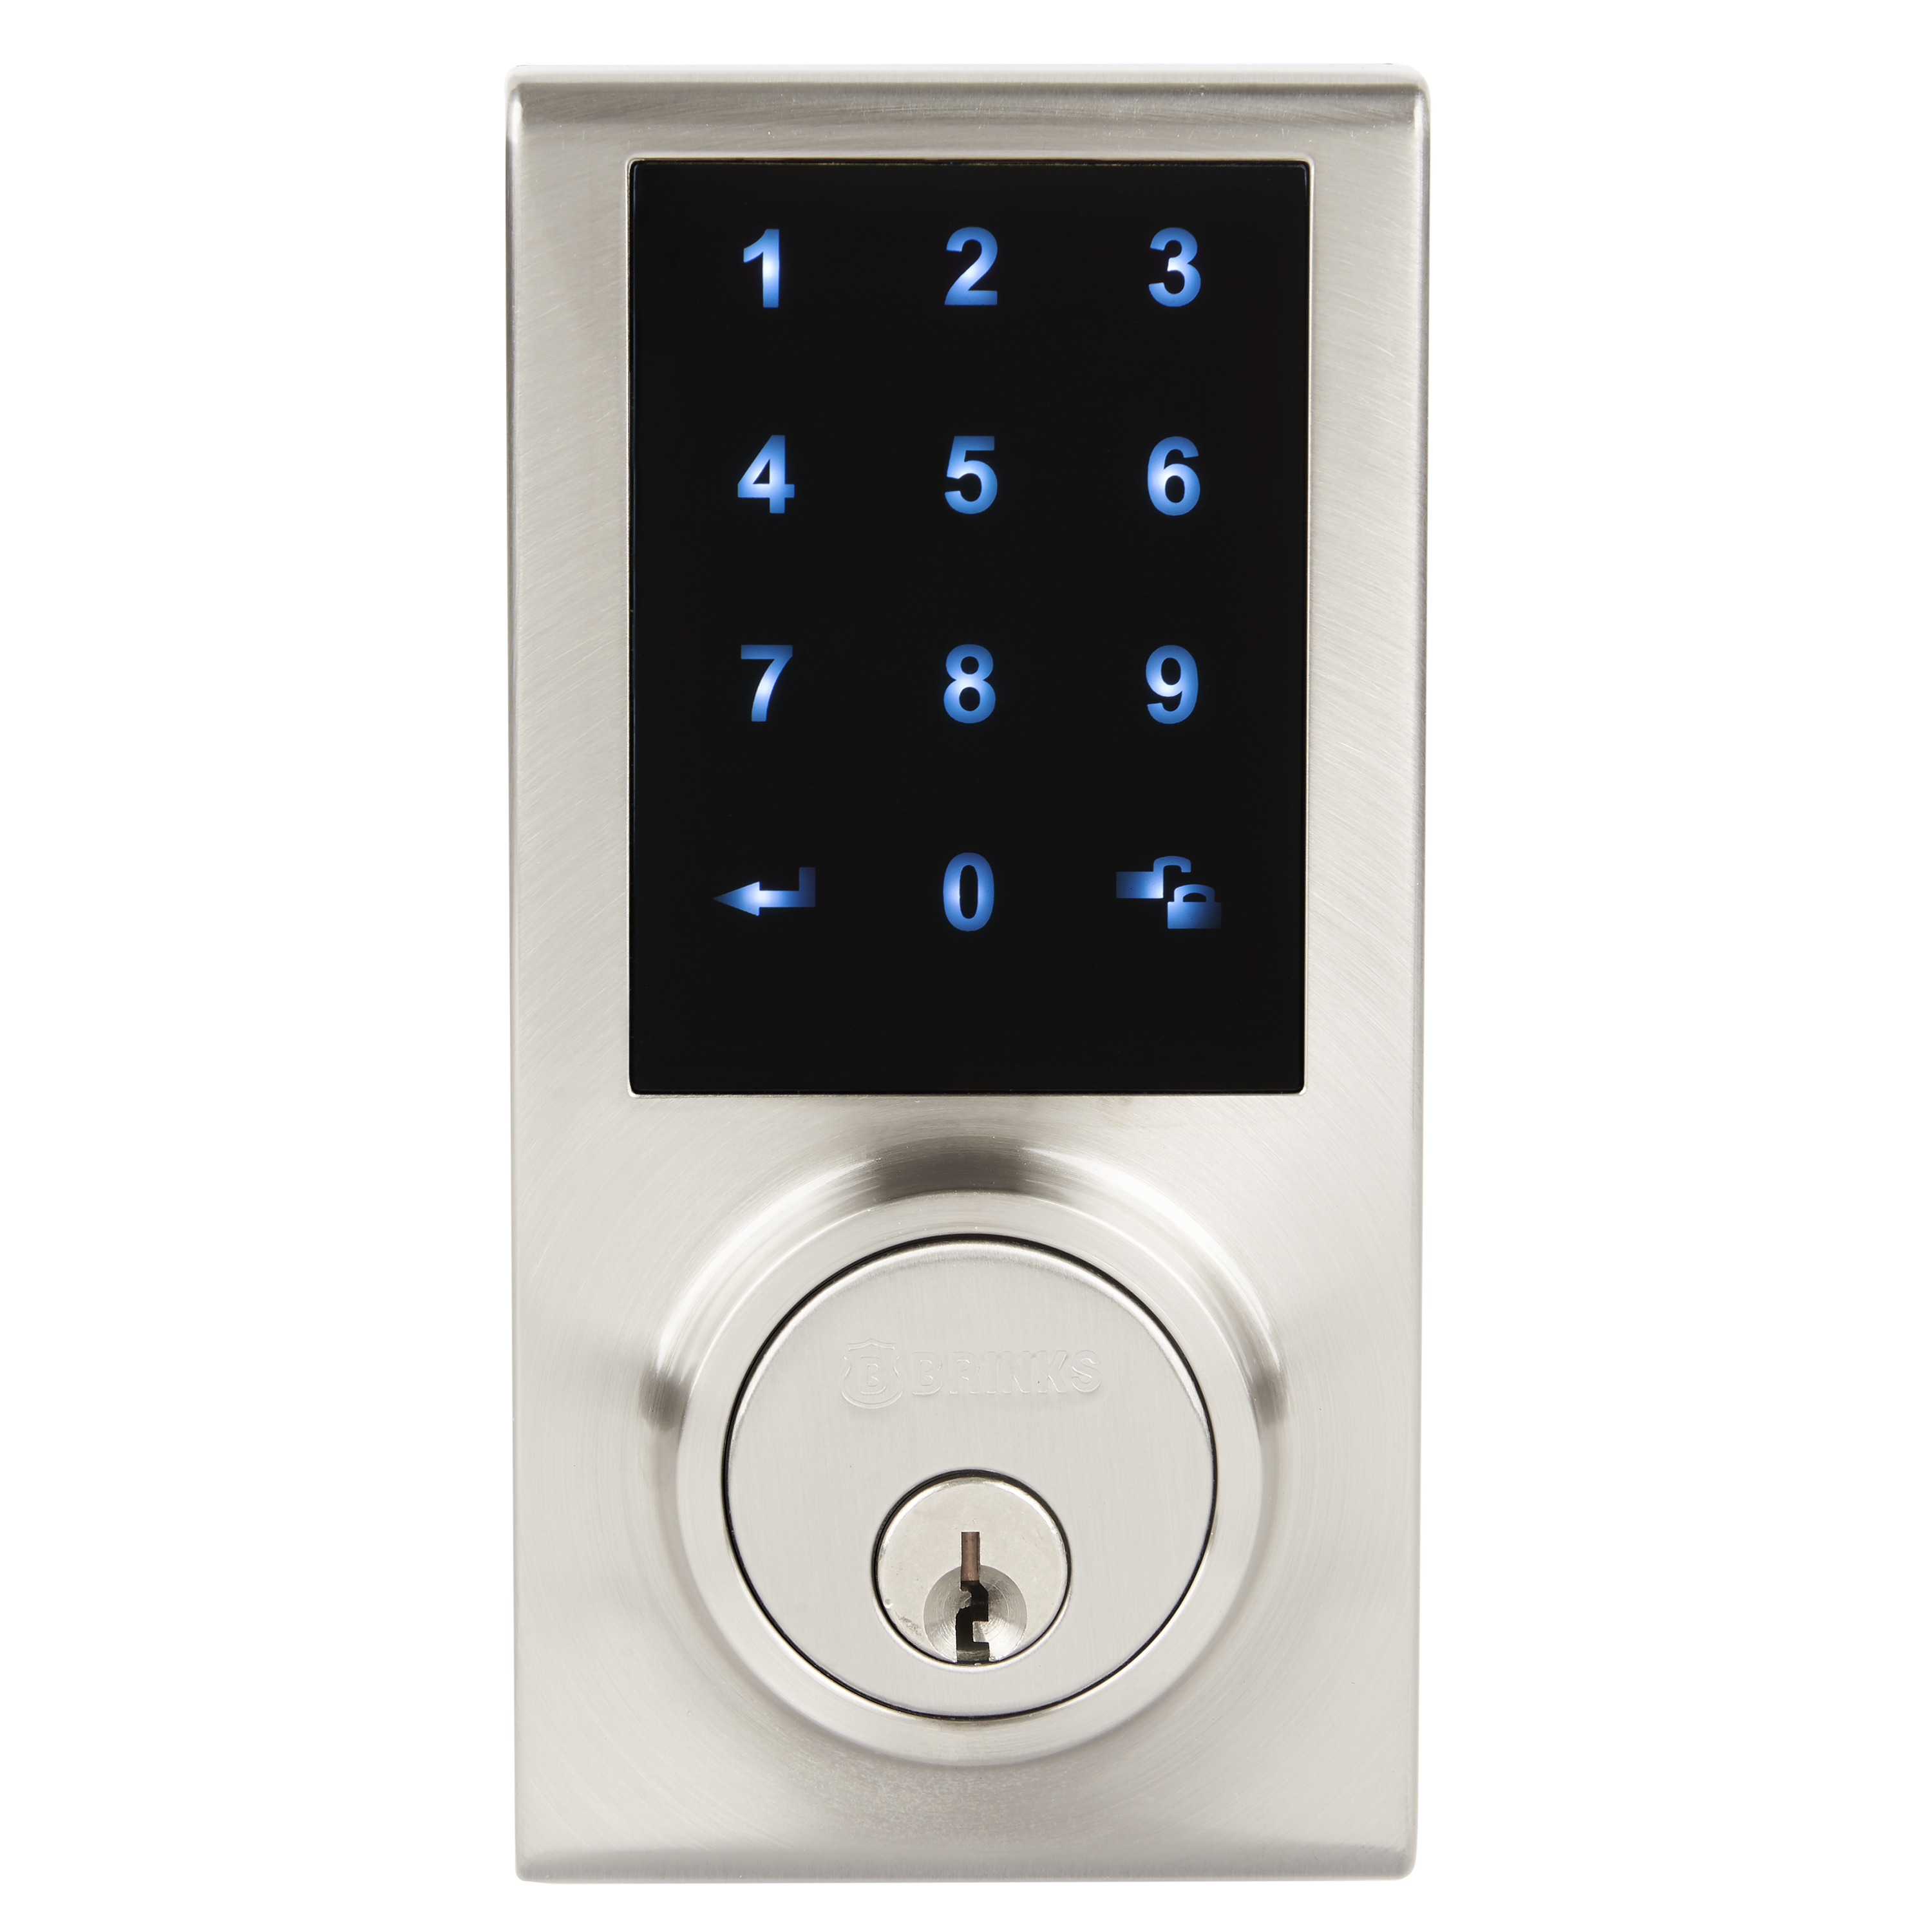 Brinks, Keyed Entry Satin Nickel Electronic Touchscreen Deadbolt - image 1 of 16